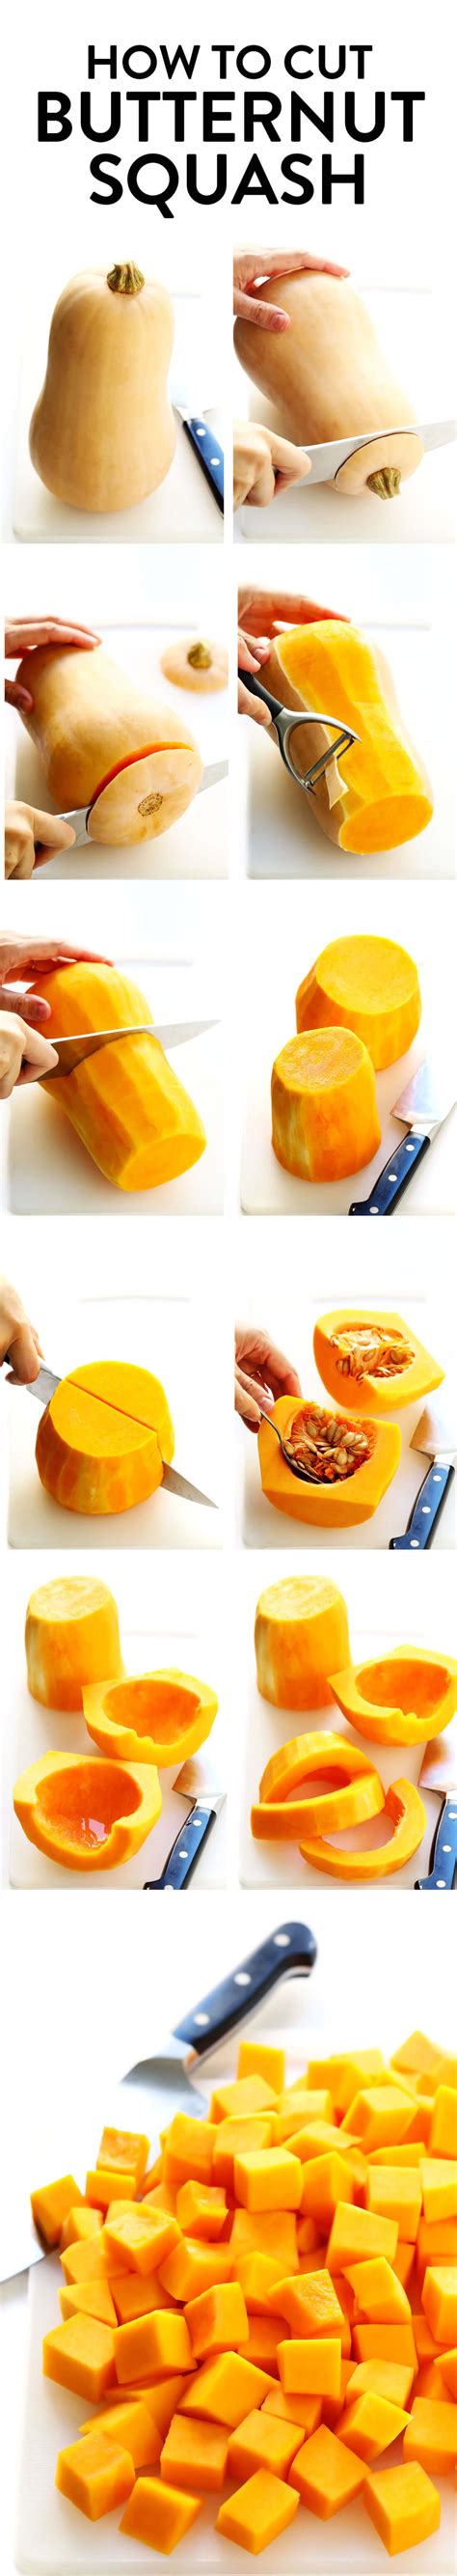 How To Cut Butternut Squash Gimme Some Oven